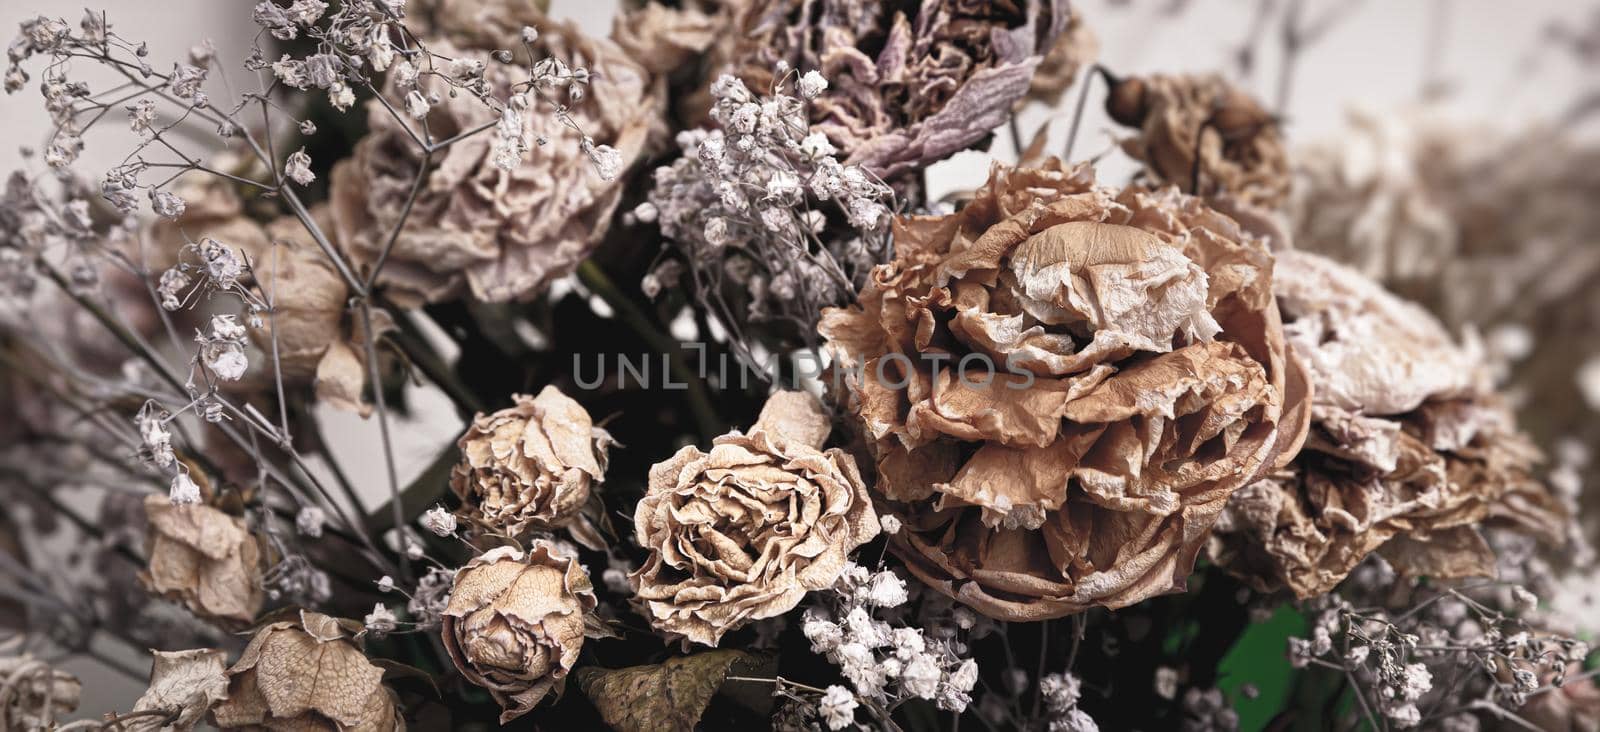 Dry bouquet. Close-up image of dried flowers in a bouquet. Life and death concept. Withered flower background